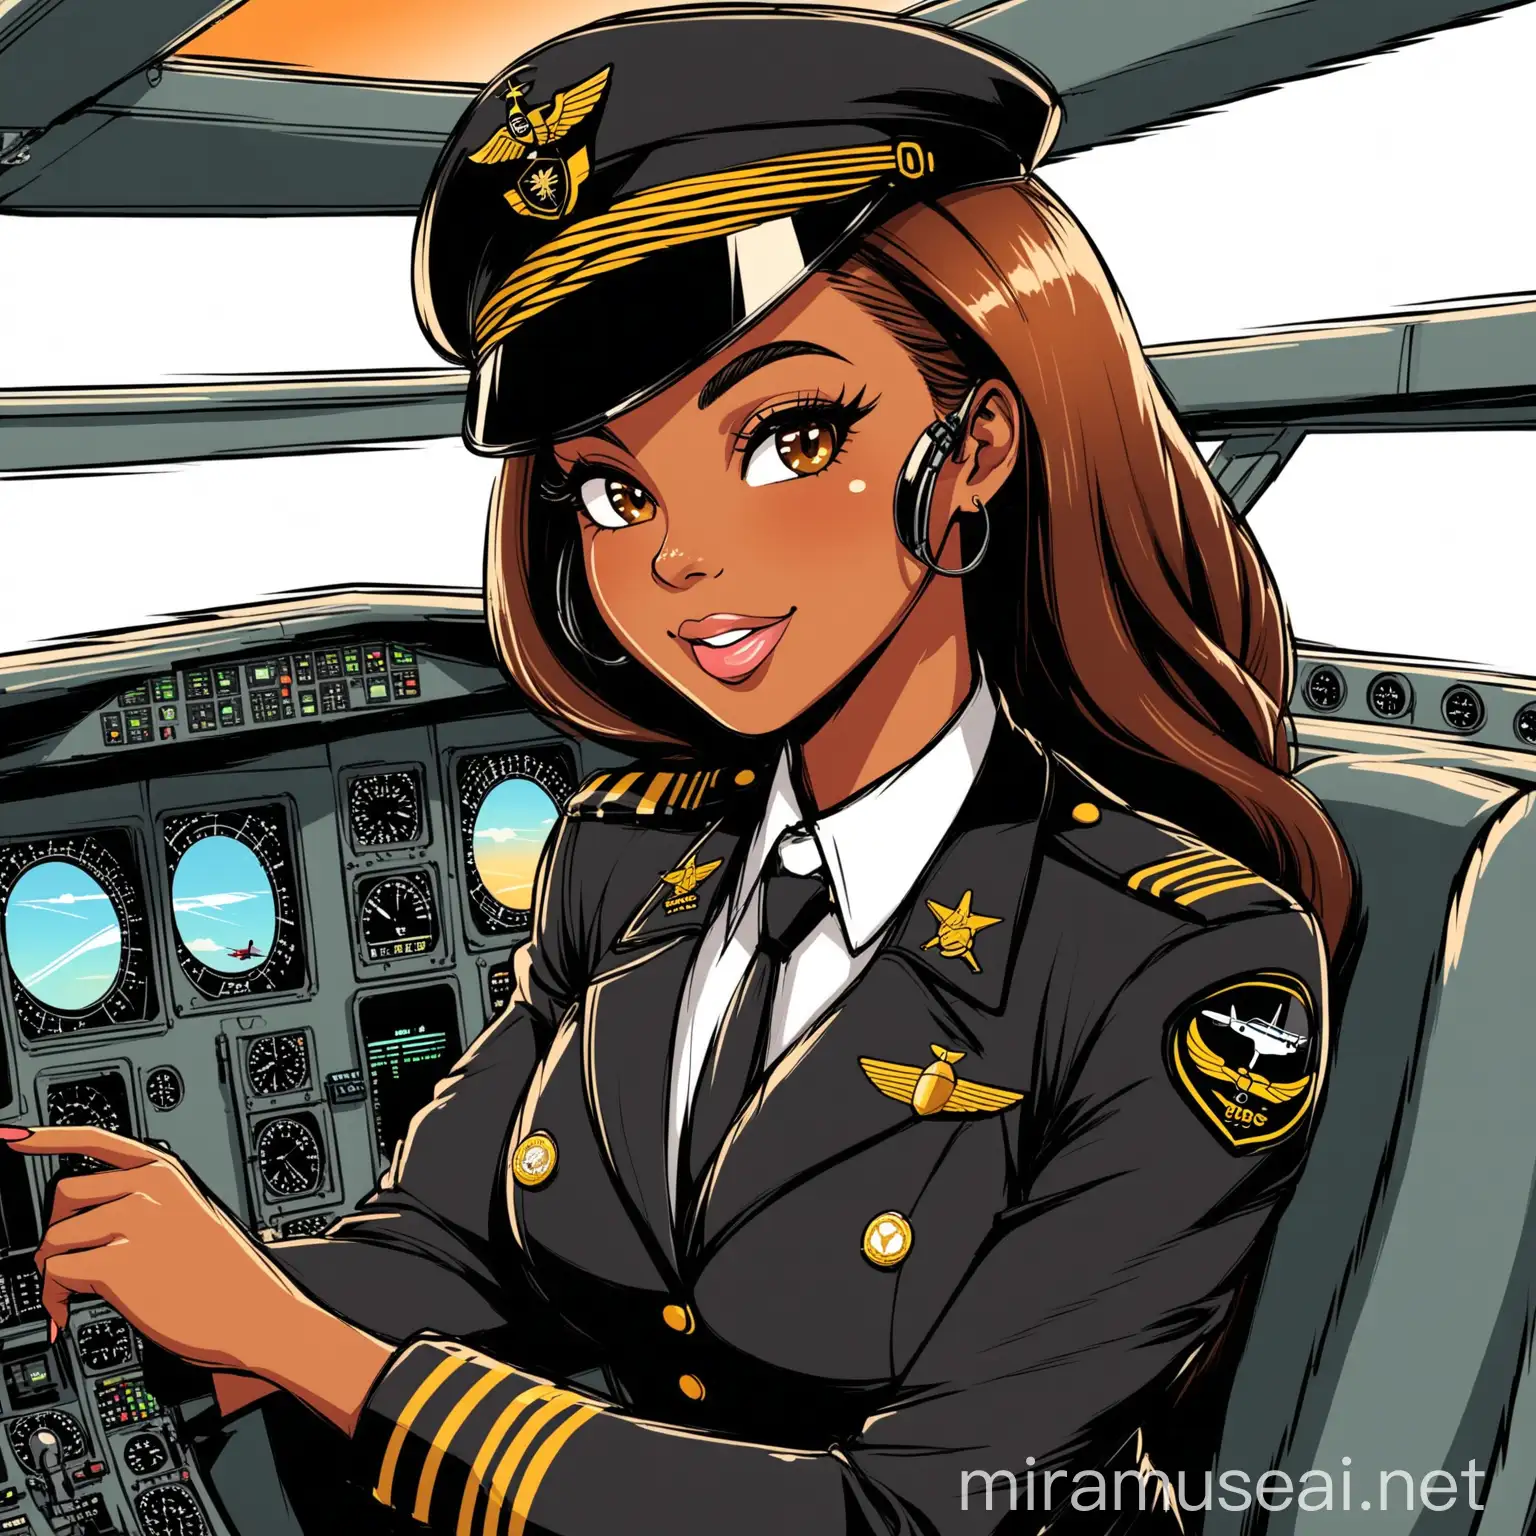 Cartoony Color Confident Black Woman Pilot in Cockpit Flying for an Airline